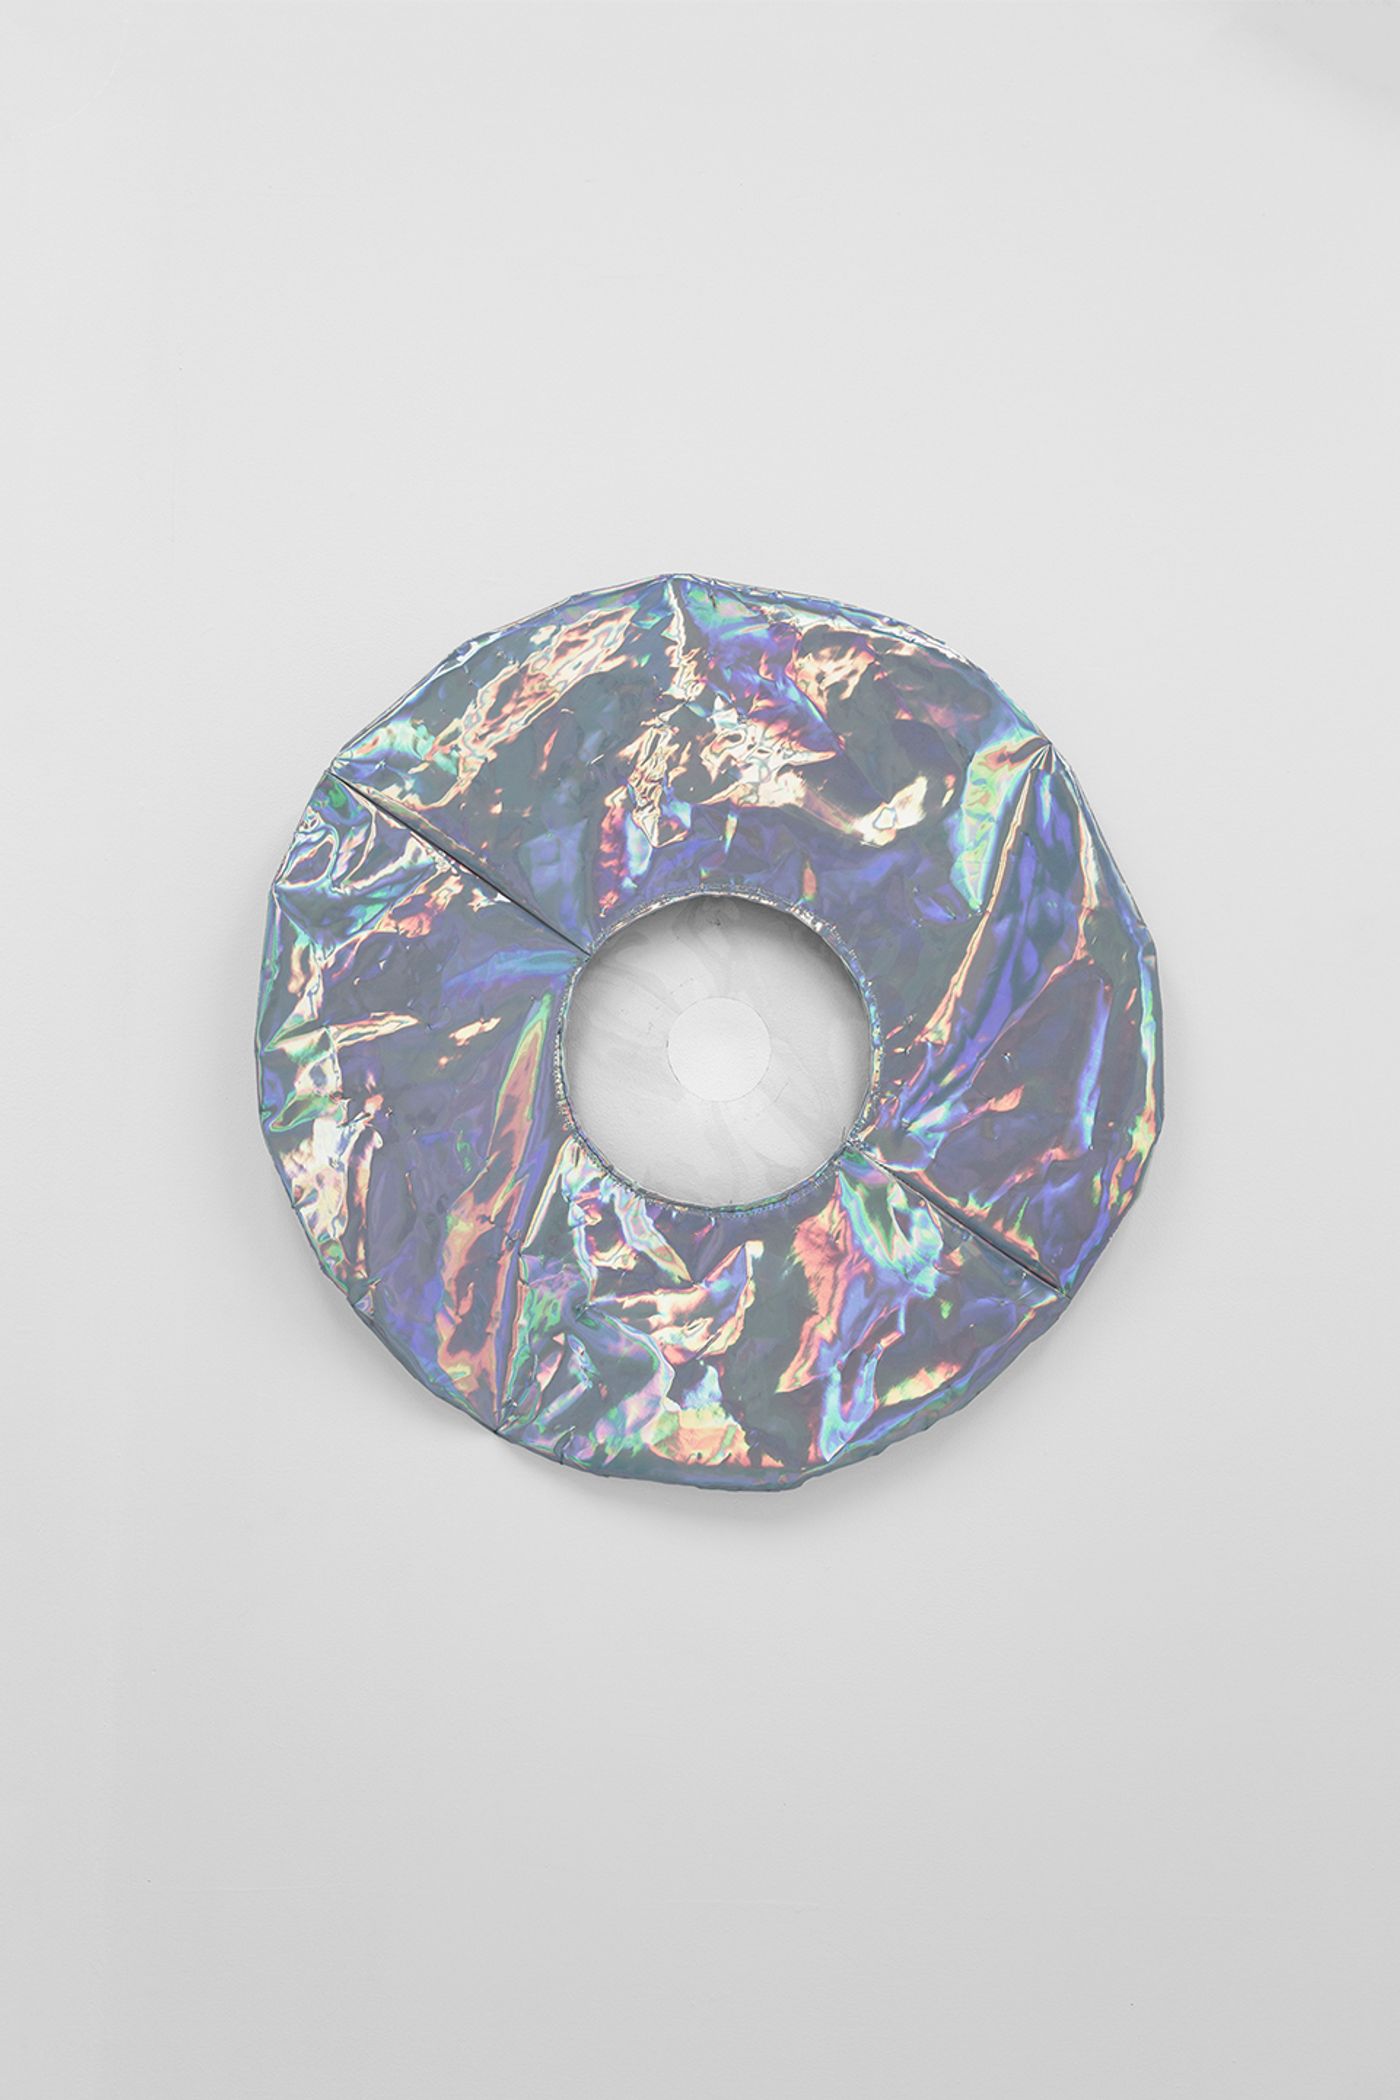 Image of Soft LaserDisc, 2017: Vinyl and poly fill